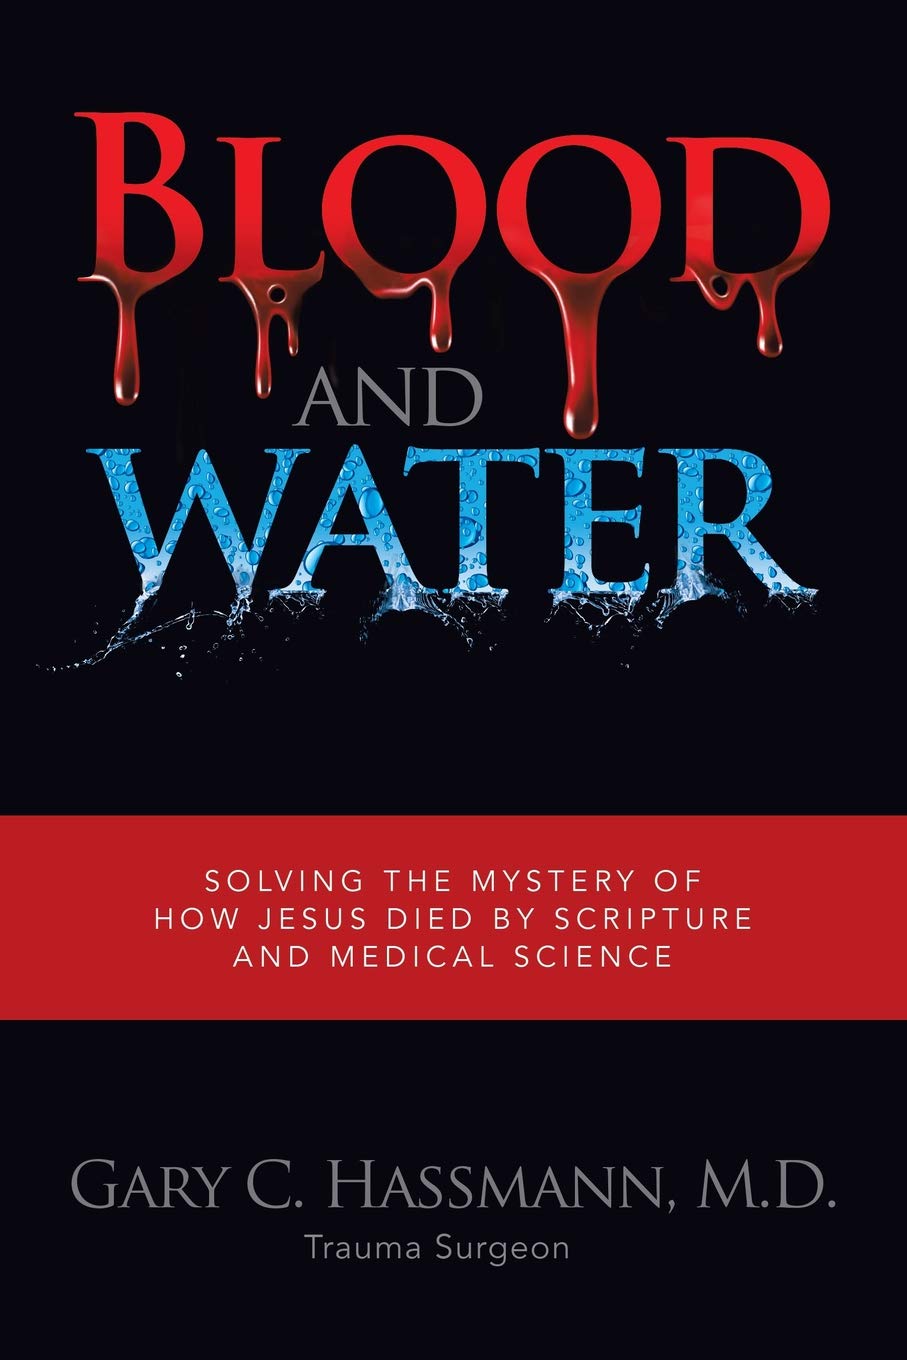 Author’s Tranquility Press Promotes Dr. Gary Hassmann’s Blood and Water